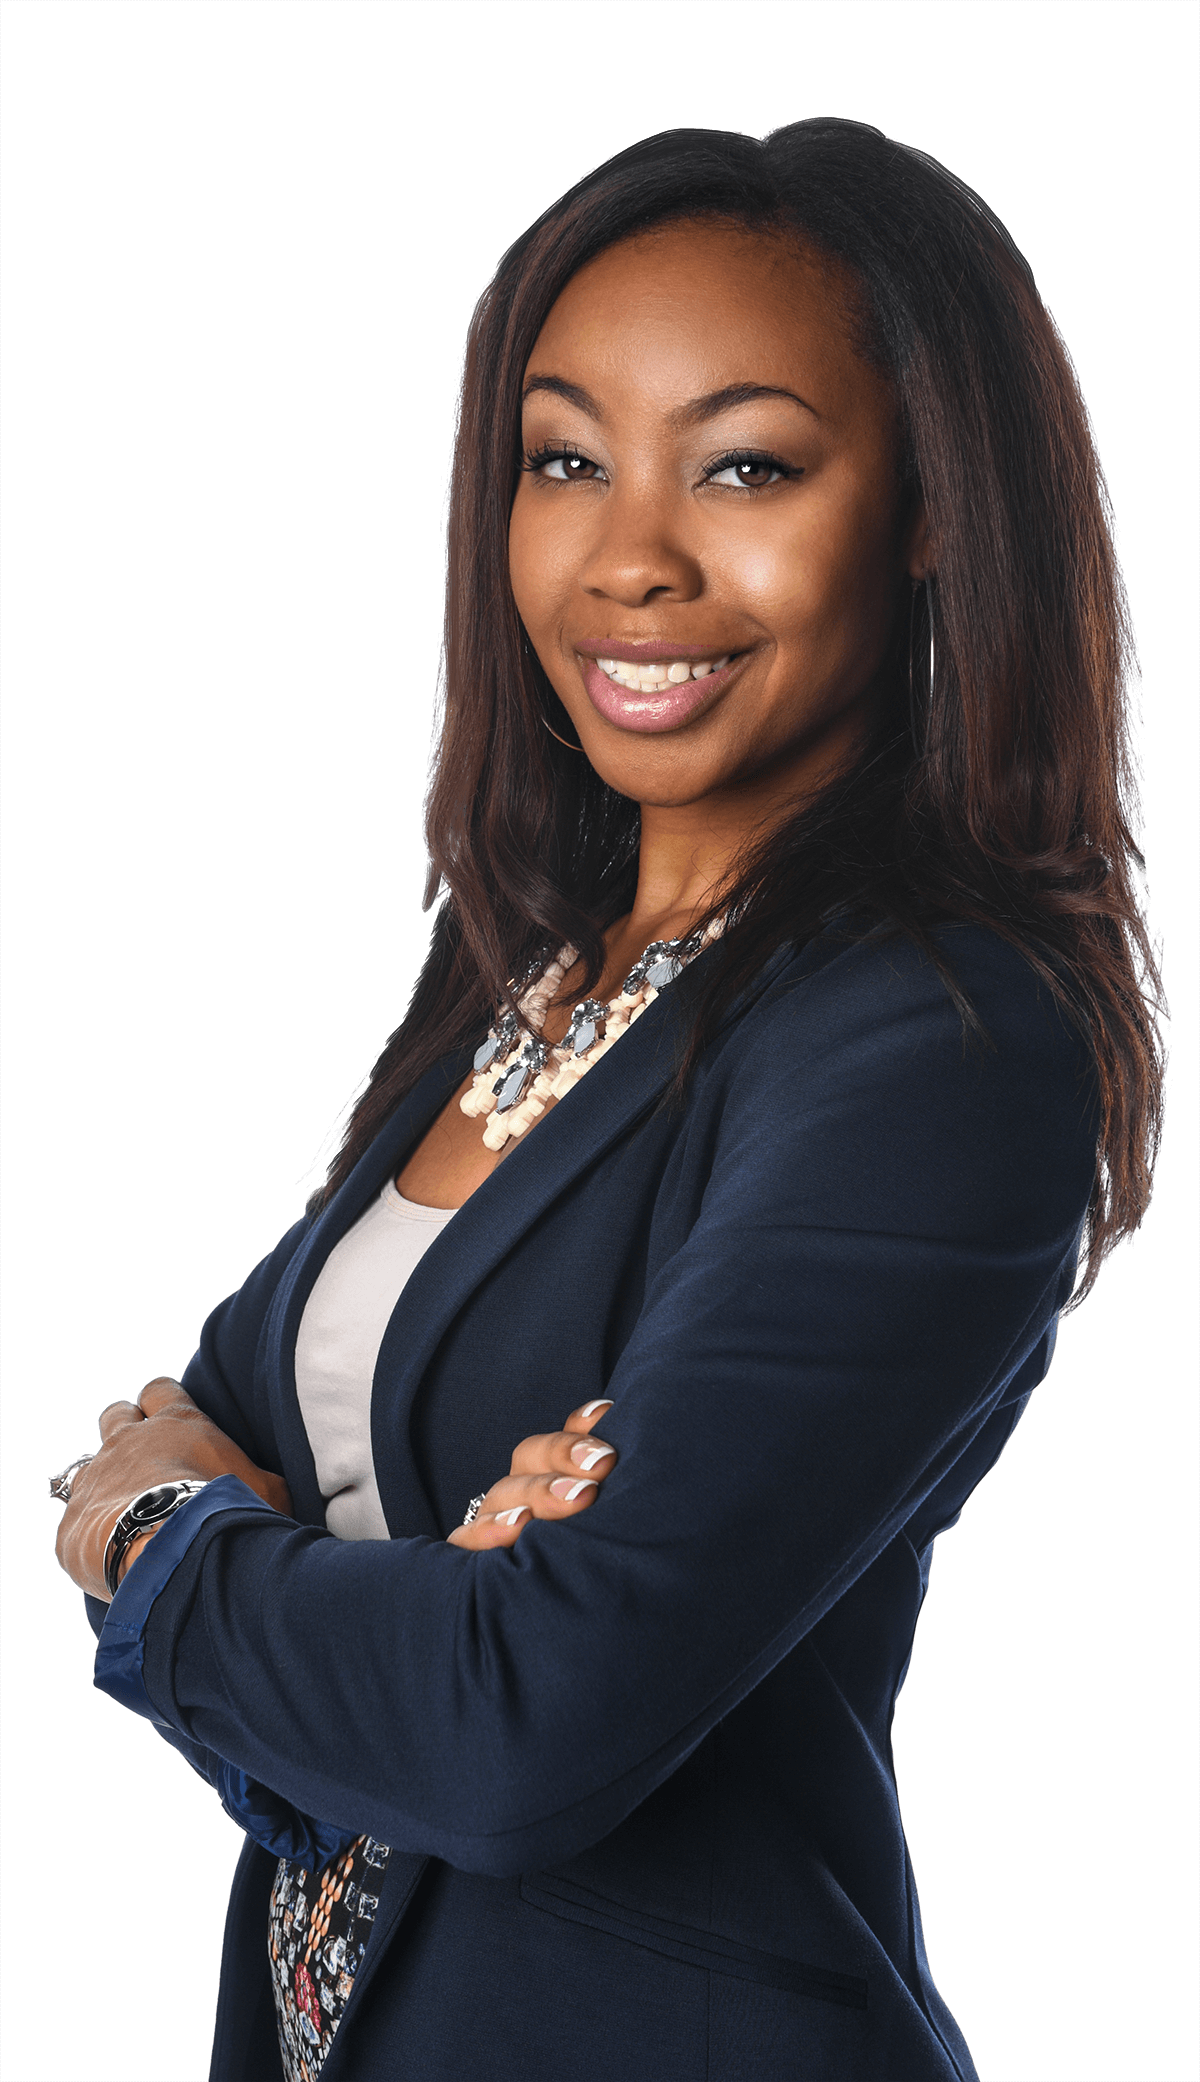 Smiling Business Woman PNG File